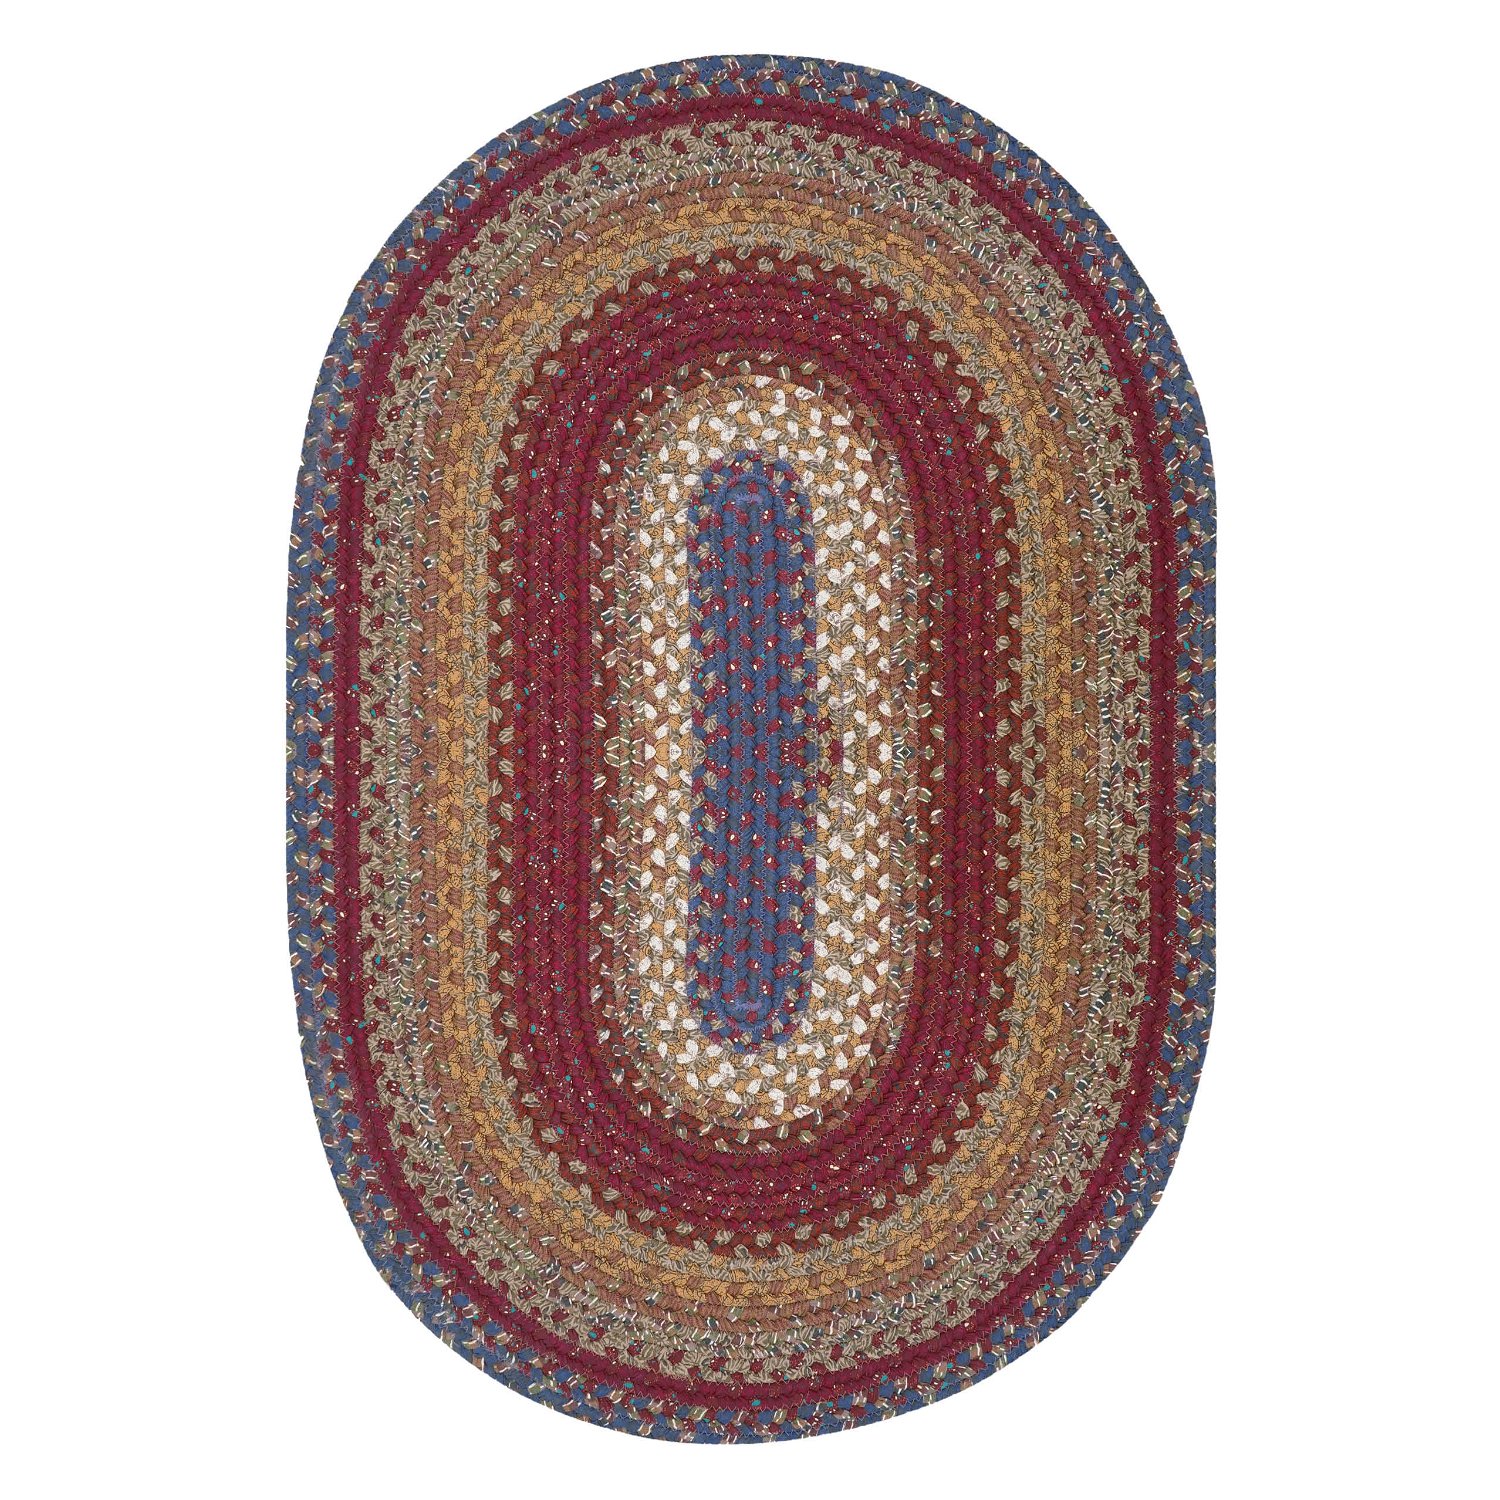 Homespice Apple Pie Jute Red 6x9' Oval Braided Rugs for Living Room,  Bedroom Rug and Dining Room. Pet Friendly. Decor Styles- Farmhouse Rug,  Rustic, Vintage, Cottage, Primitive, Country, Boho Rug 